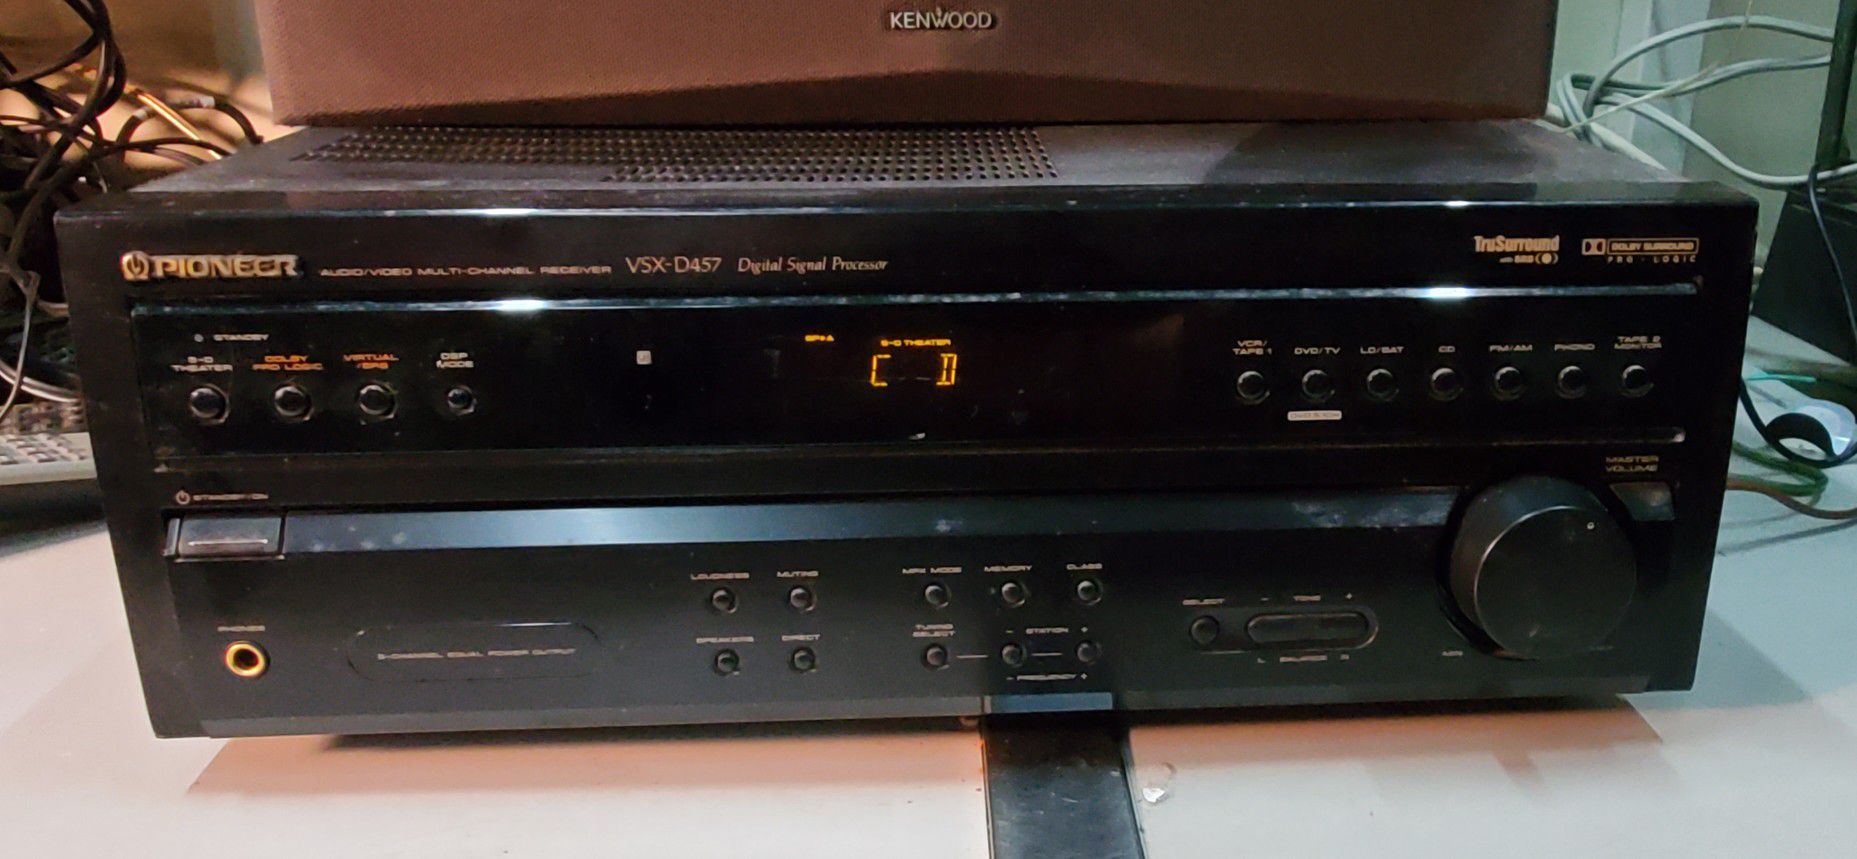 Pioneer VSX-D457 Audio/video Receiver with Dolby Digital and DTS.

Watch Video